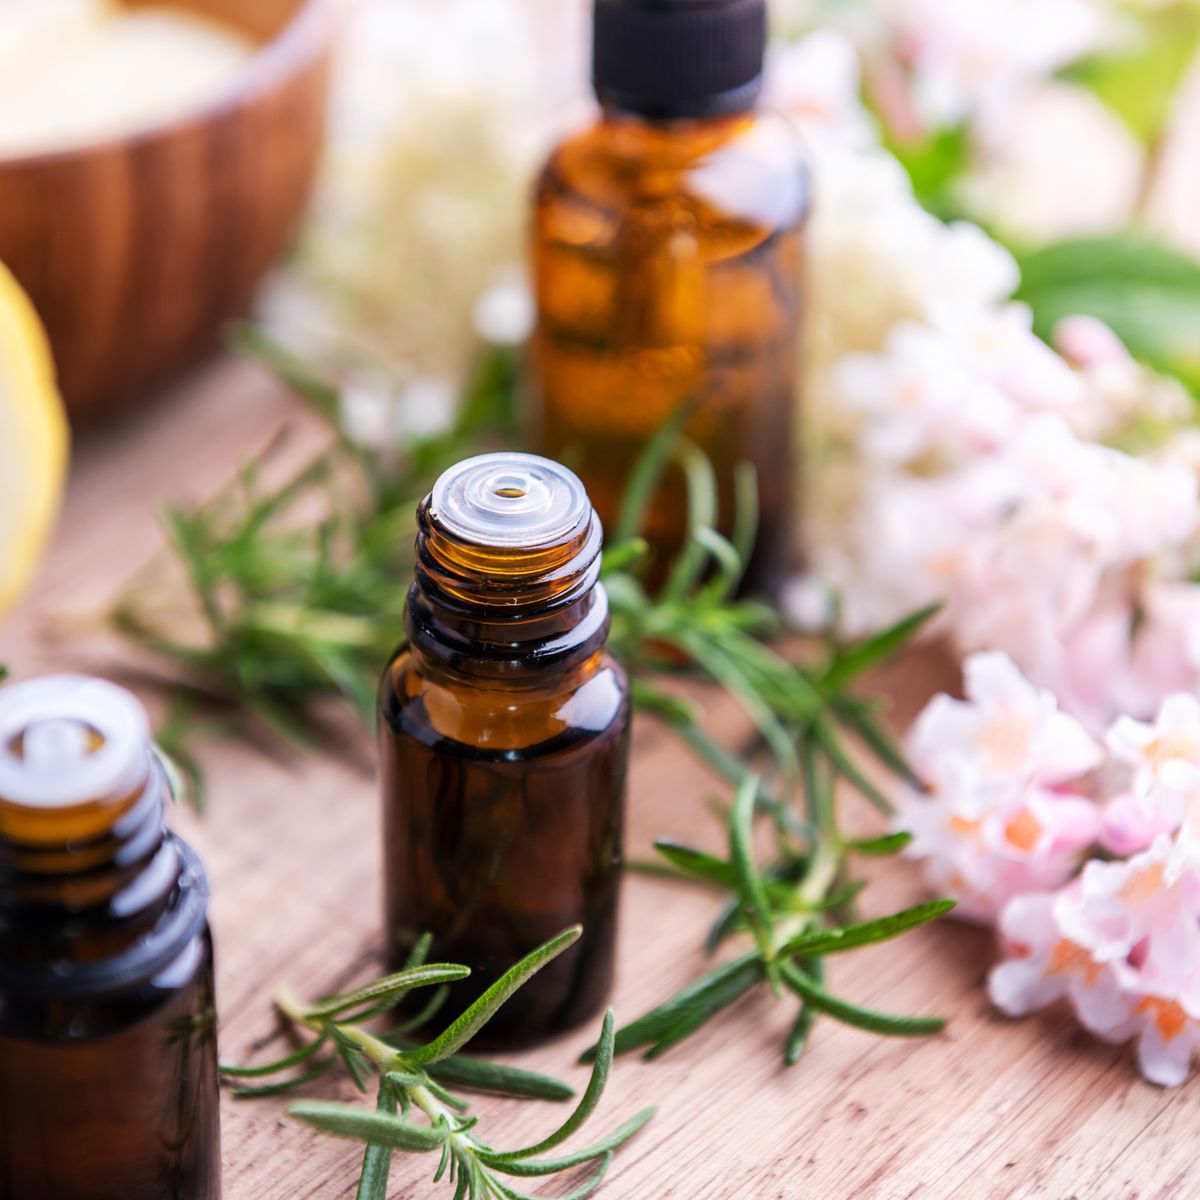 Does Rosemary Oil Help With Hair Growth? The Best Rosemary Oil Hair Products